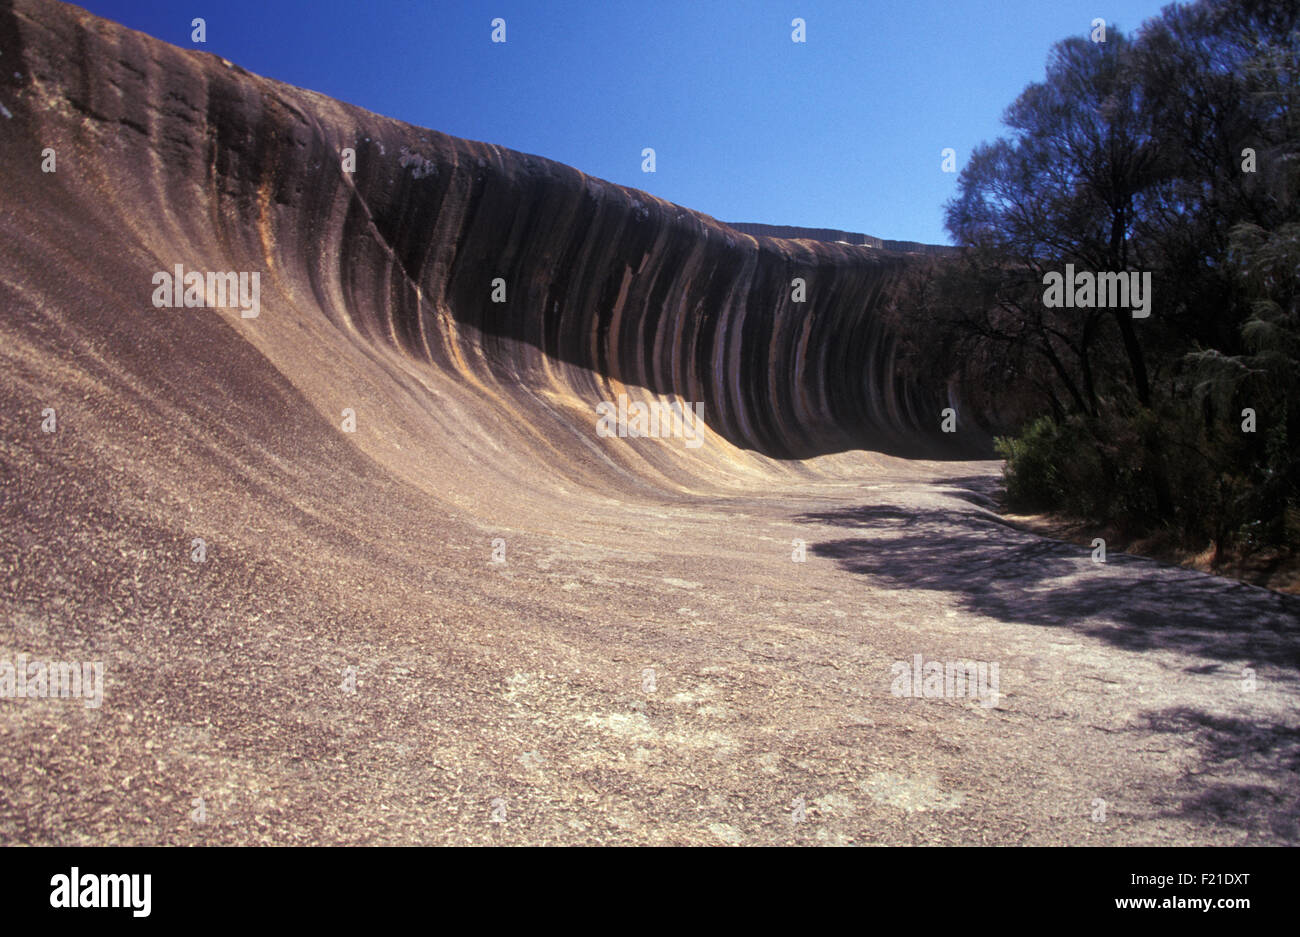 Wave Rock (also known as Hyden Rock) 296 kms east south east of Perth, Western Australia Stock Photo